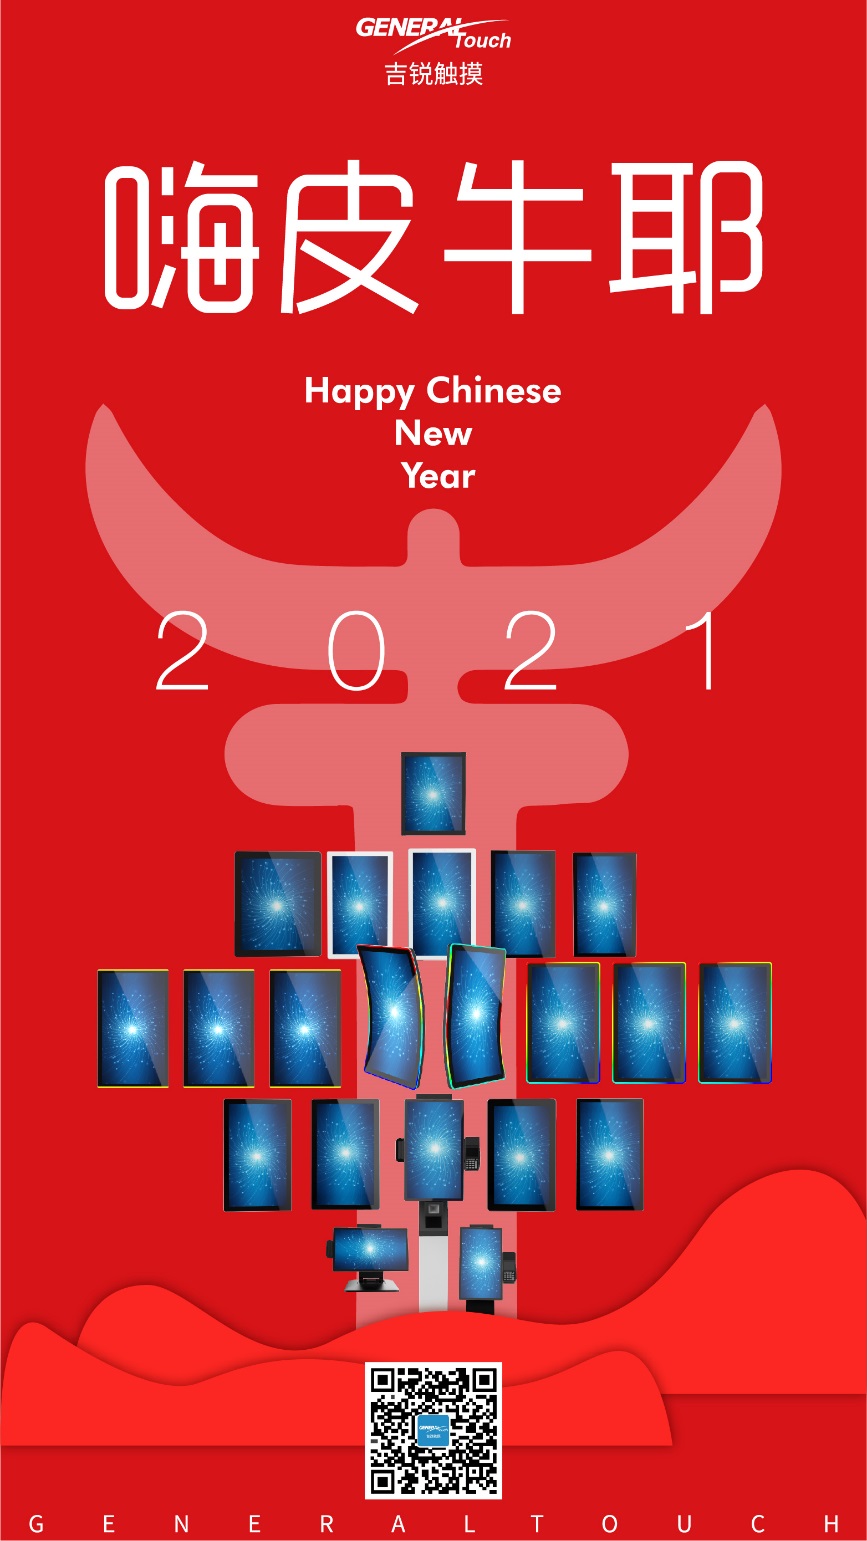 Happy Chinese New (Niu) Year for everyone!